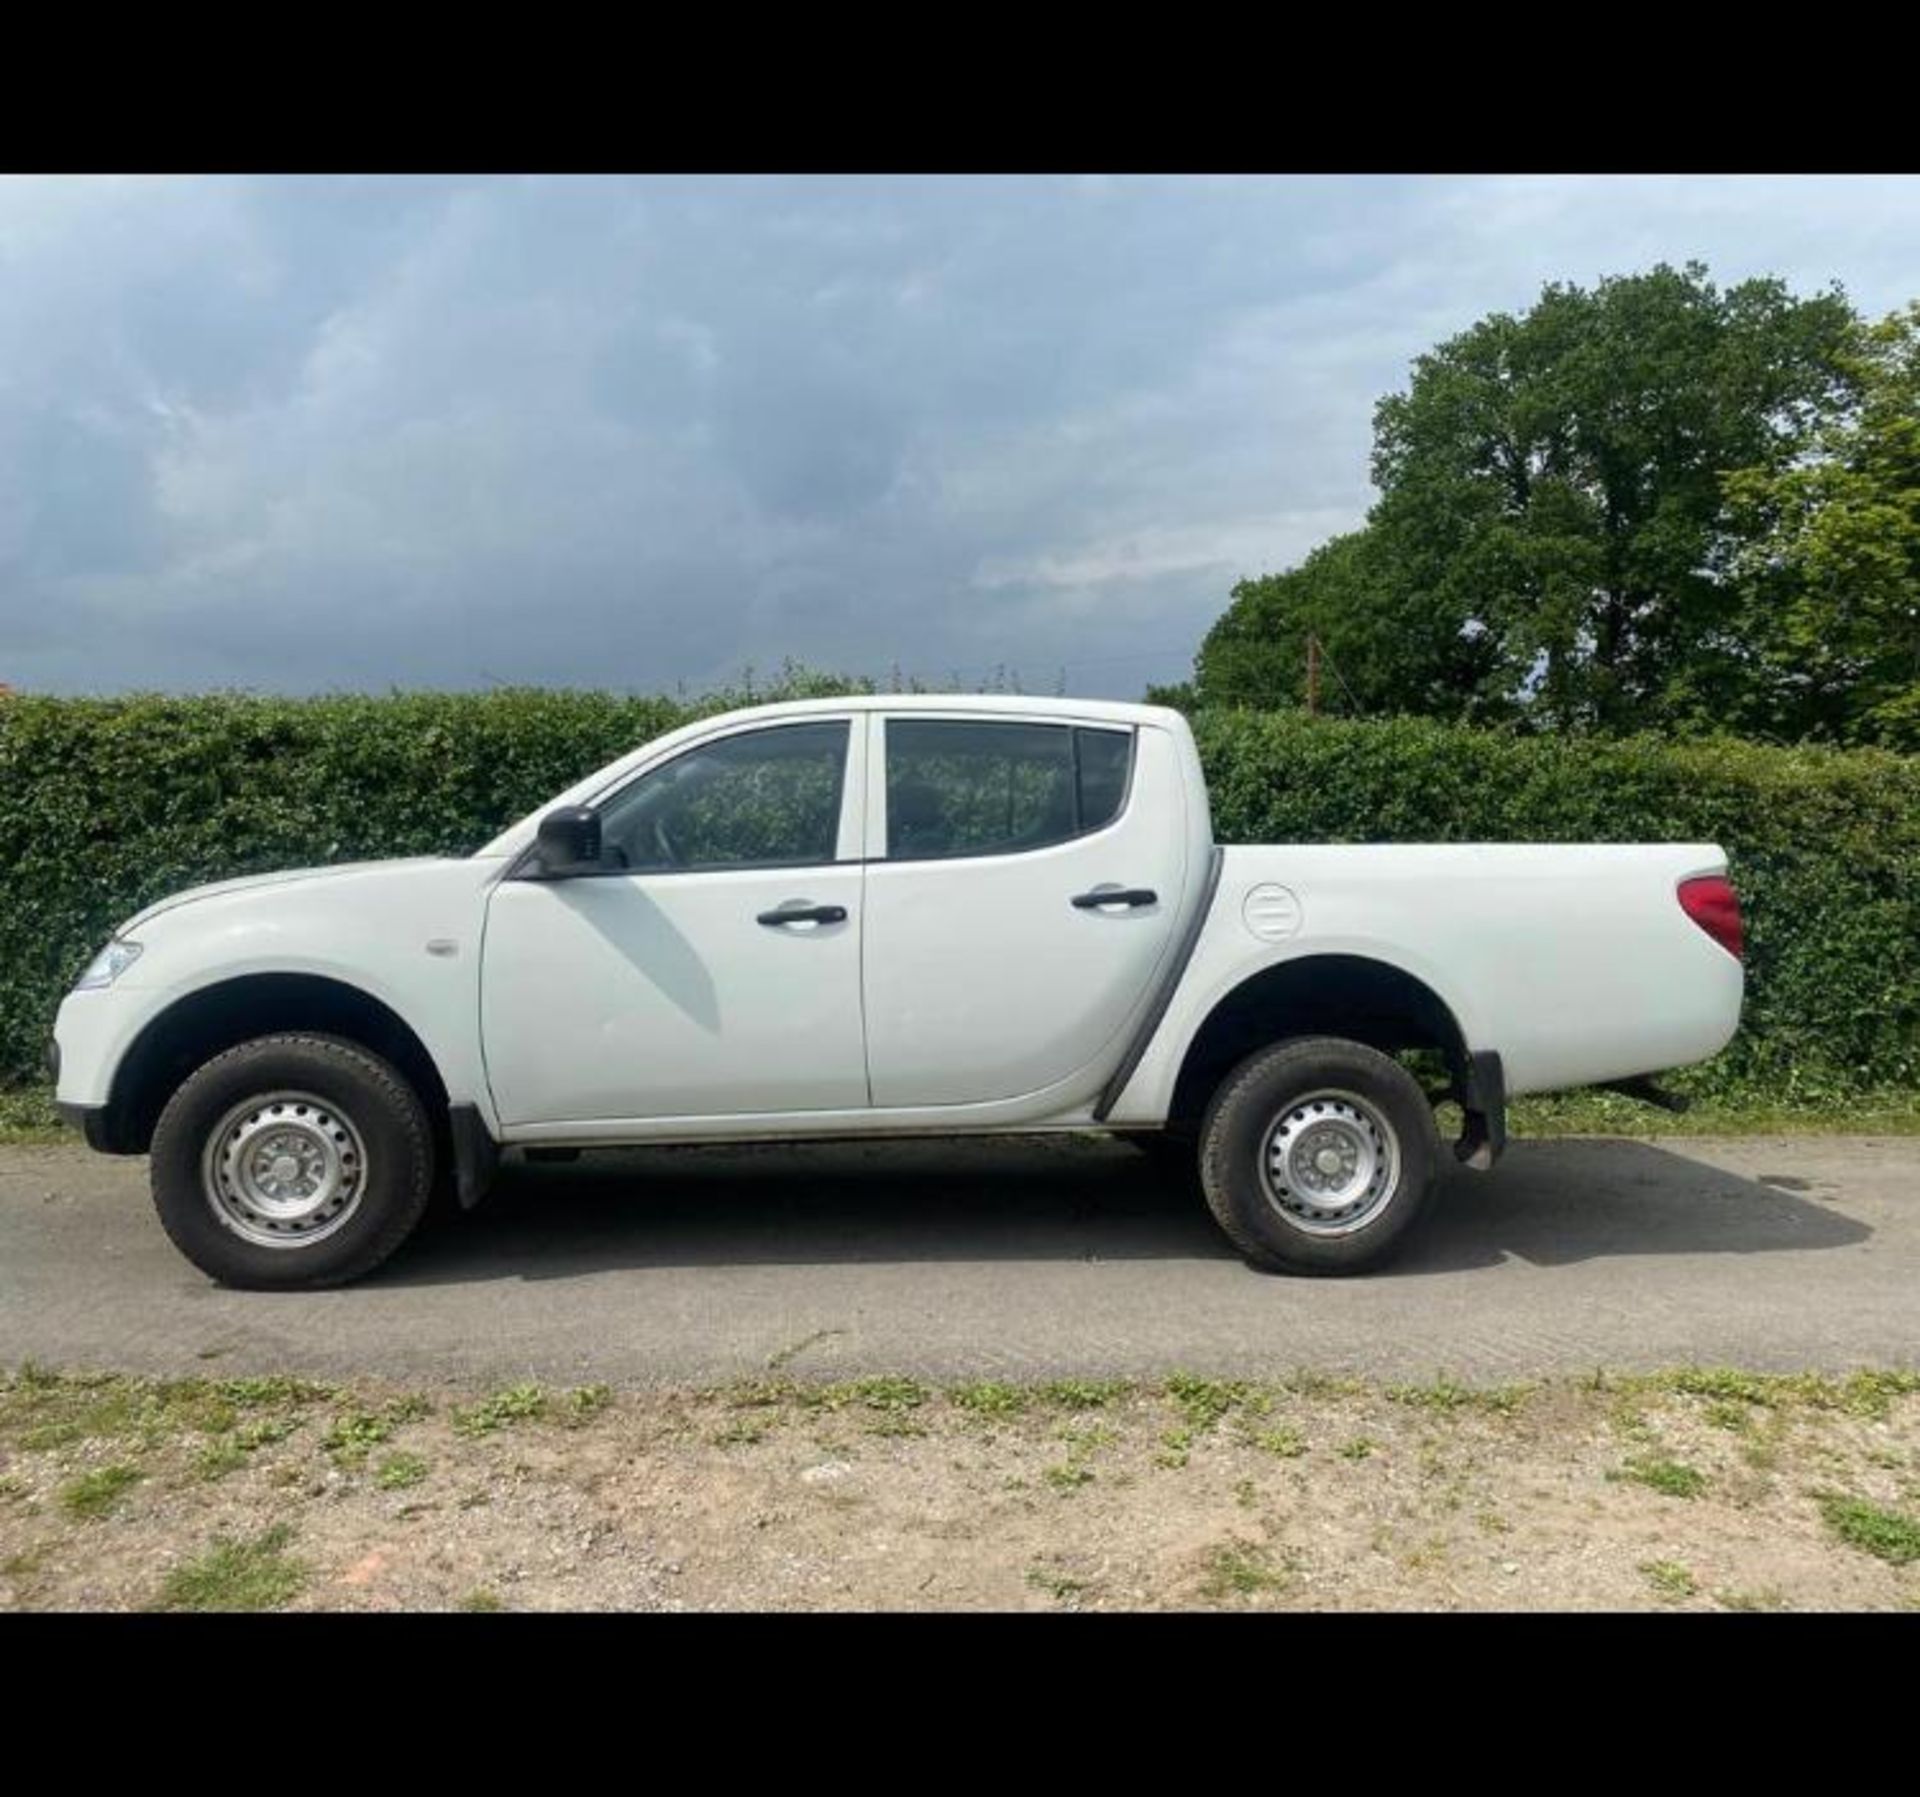 2014 MITSUBISHI L200 4 WORK 4X4 PICK UP COUNCIL DIRECT LOCATION NORTH YORKSHIRE. - Image 4 of 7